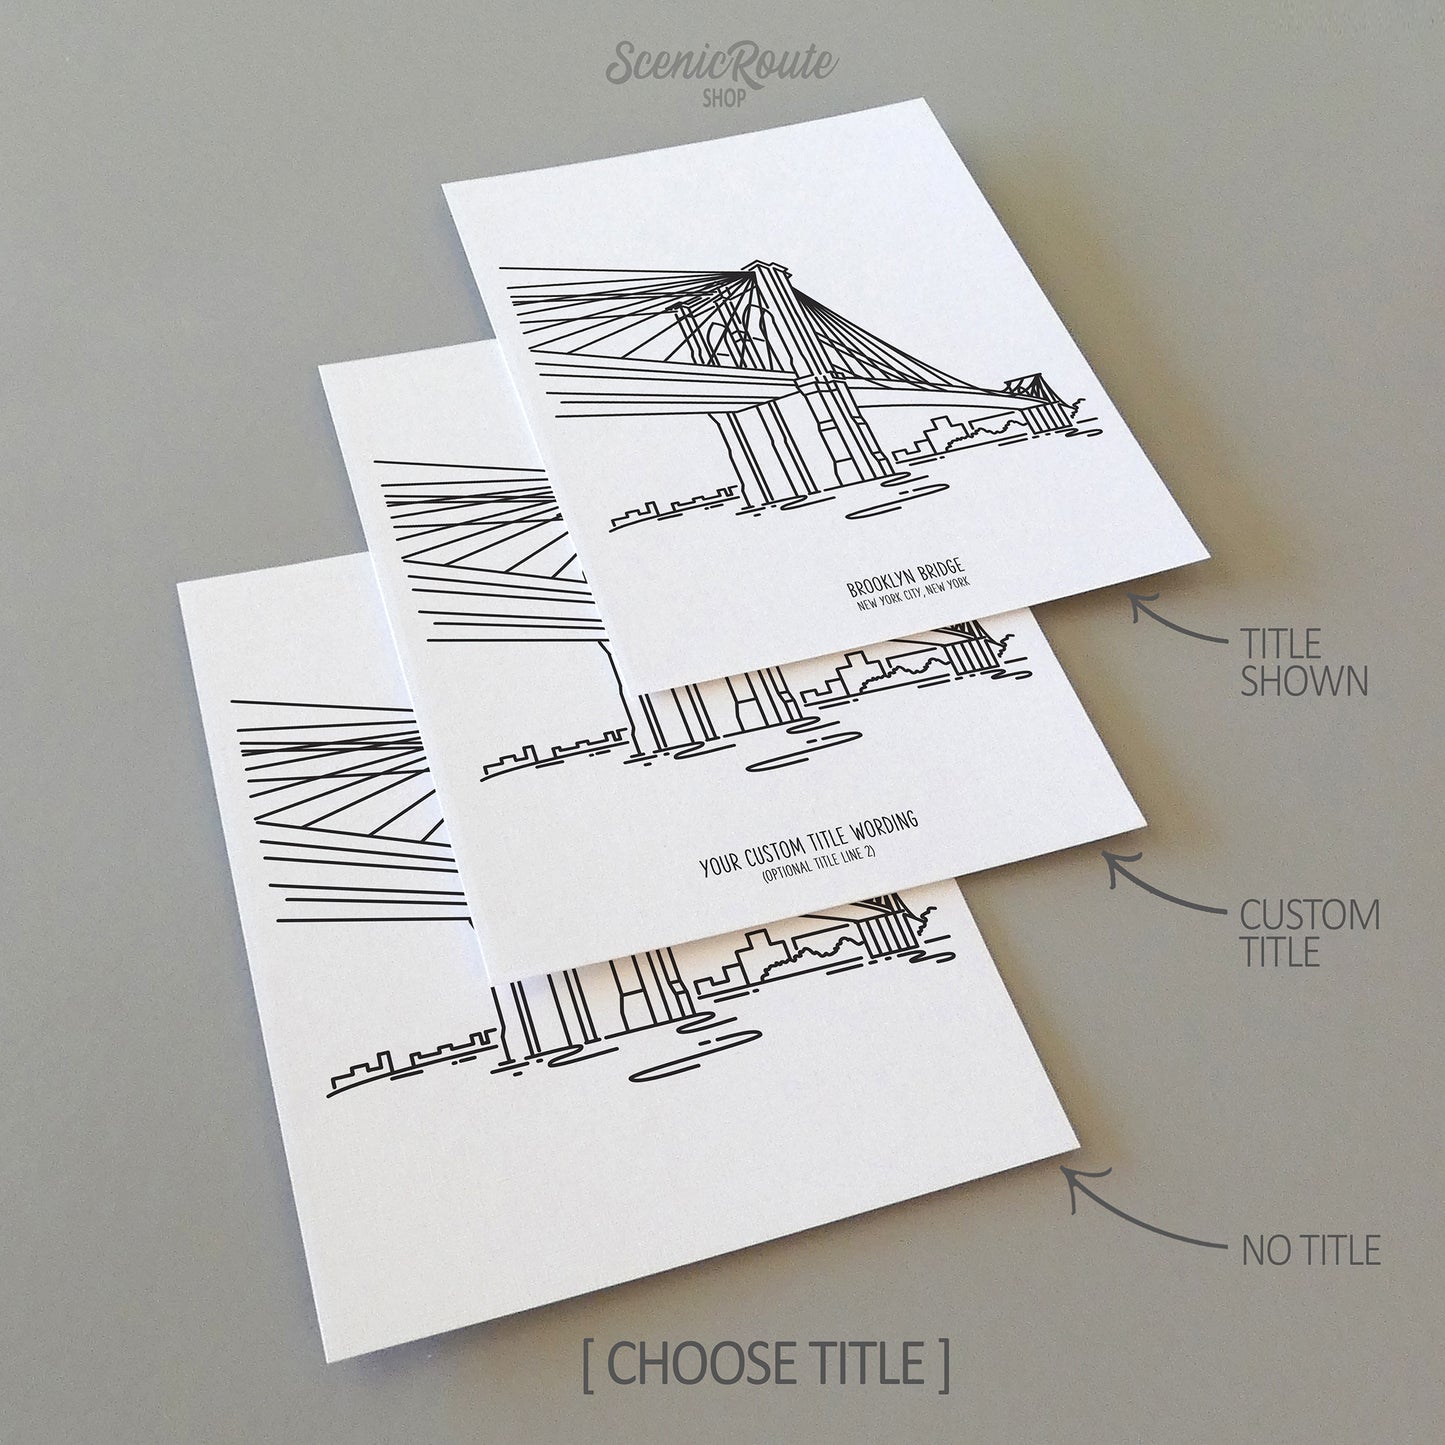 Three line art drawings of the New York City Brooklyn Bridge on white linen paper with a gray background.  The pieces are shown with title options that can be chosen and personalized.